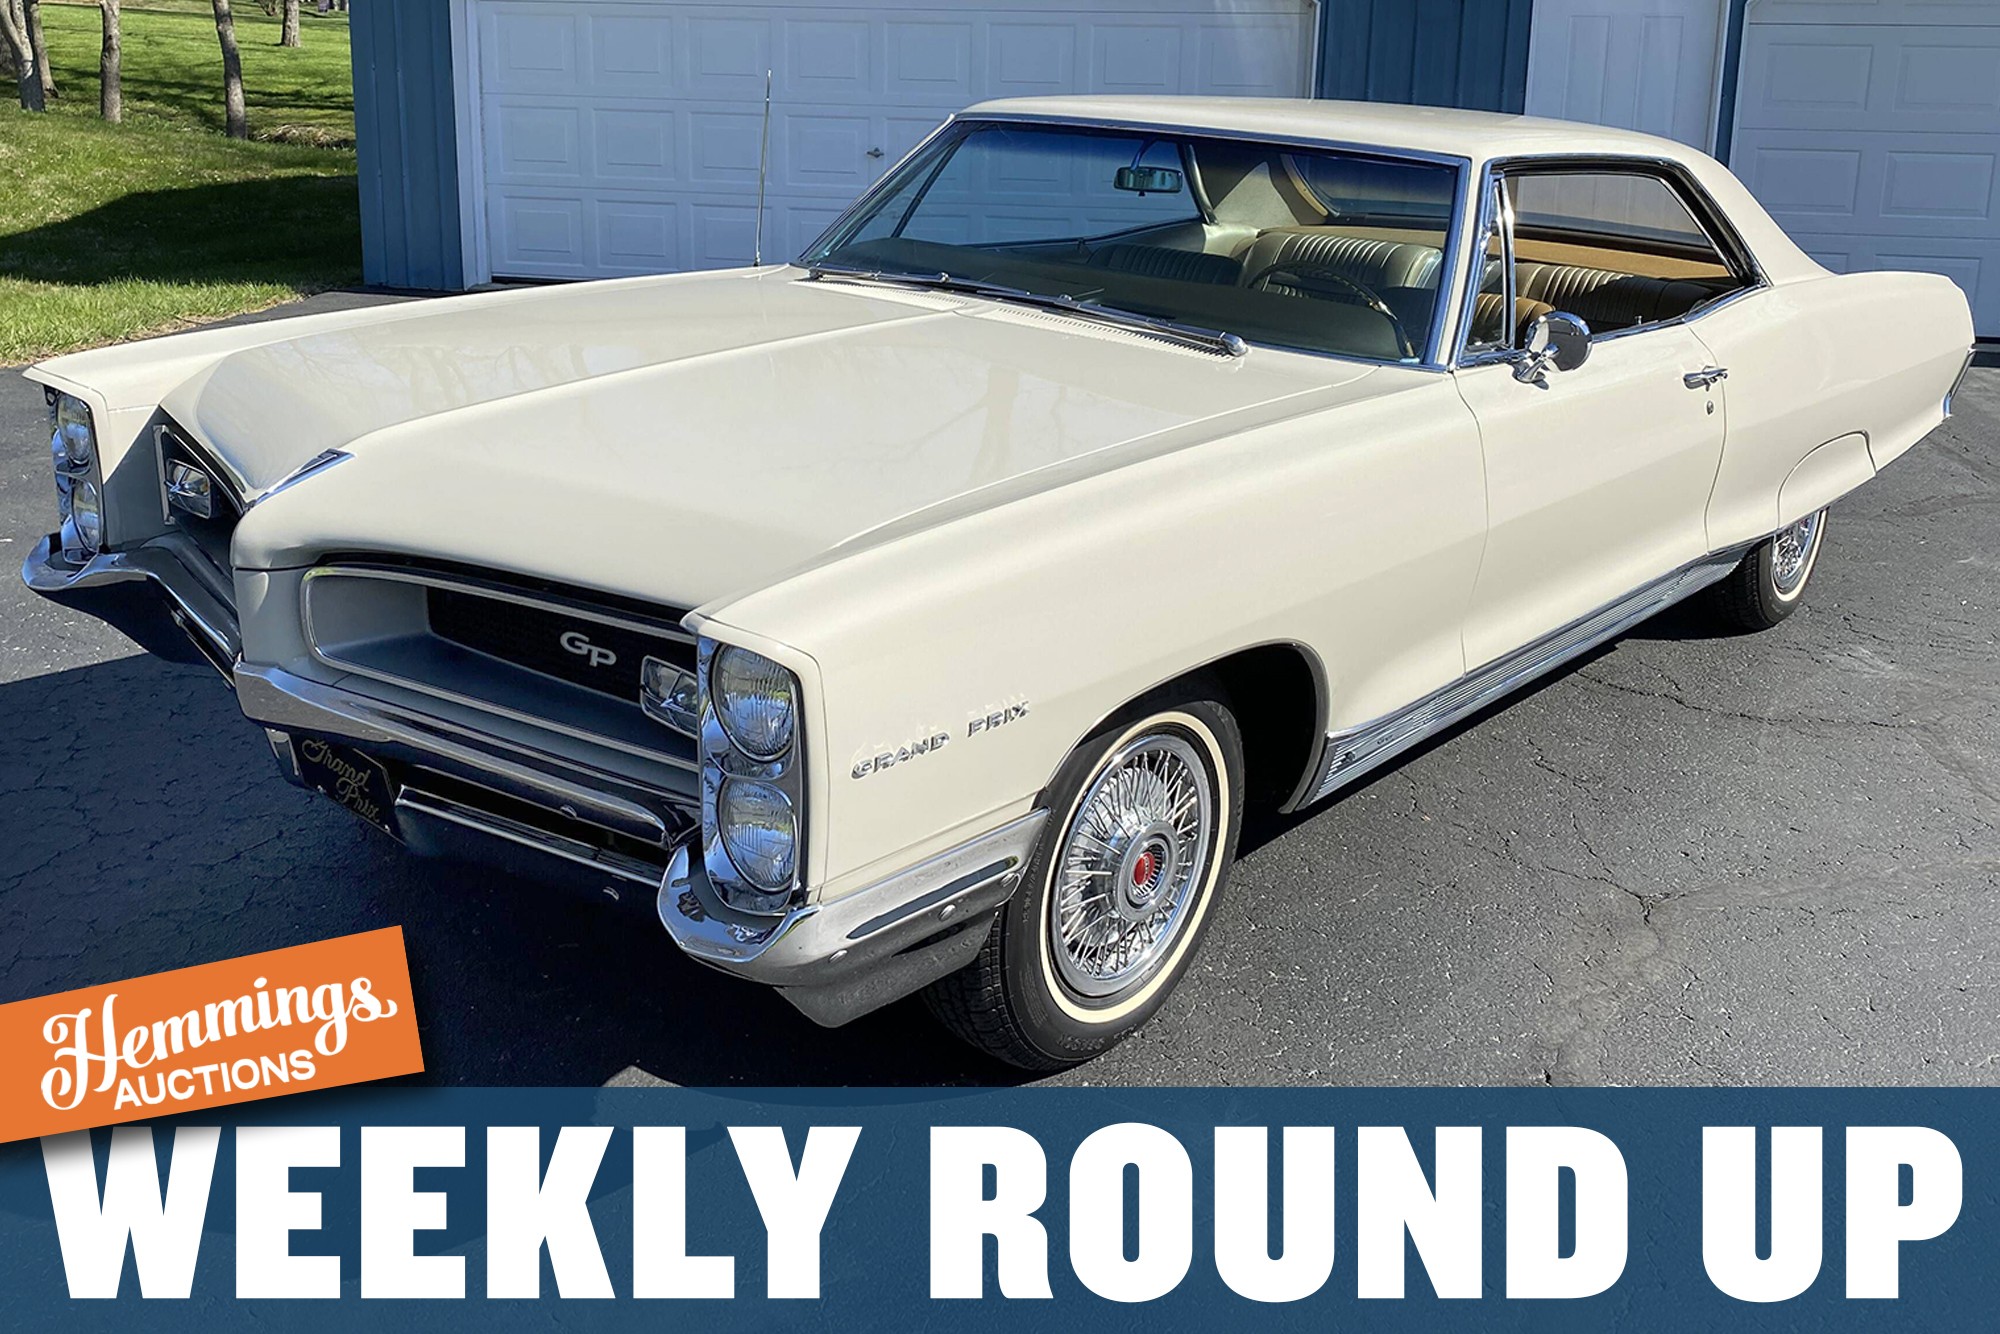 Hemmings Auctions Weekly Round Up: 1966 Pontiac Grand Prix, 1970 GMC 2500 4x4, 1932 Ford V-8 Roadster